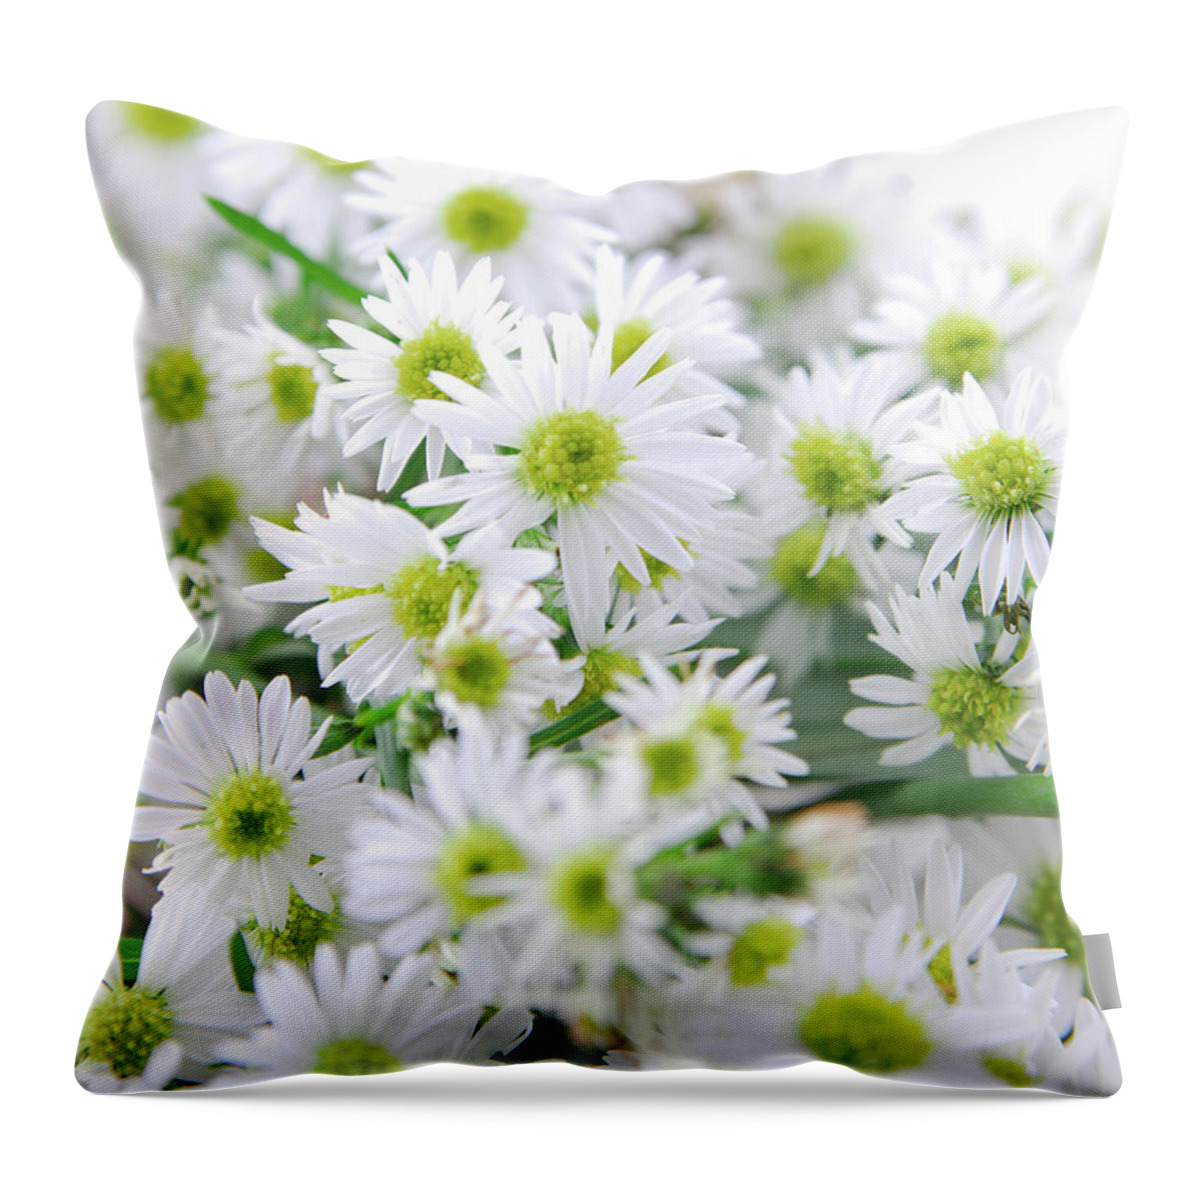 Large Group Of Objects Throw Pillow featuring the photograph Daisies by Thepalmer